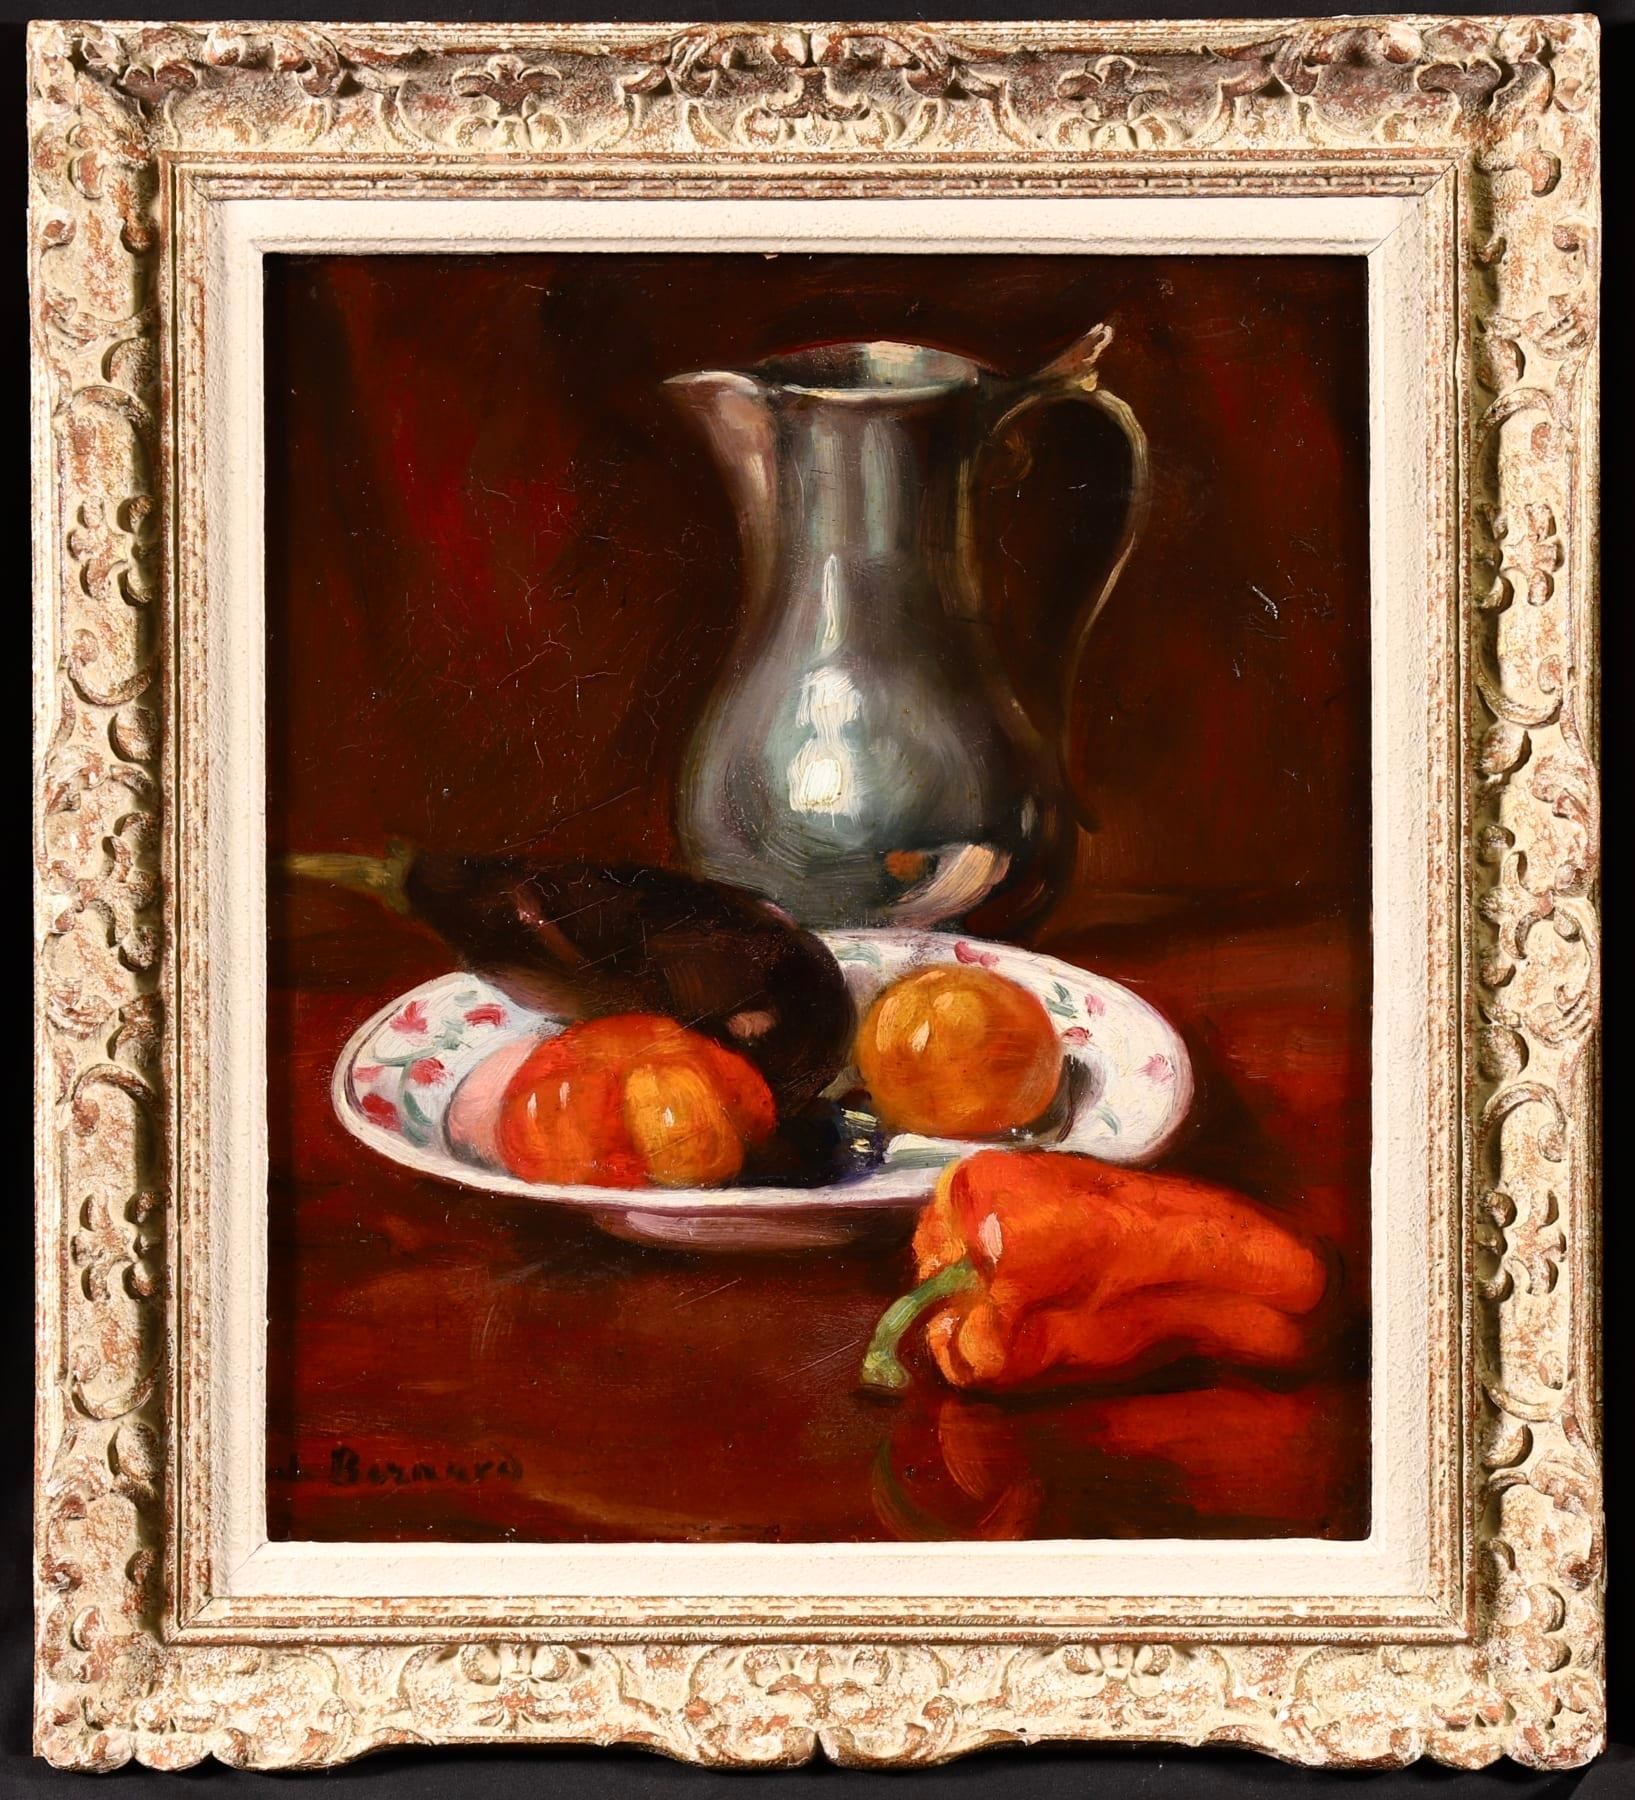 This listing includes four paintings for Nelson- see details below form individual listings (original 1stDibs reference numbers included). 

1. Georges D'Espagnat- Fleurs: A wonderful still life oil on original canvas by French post impressionist